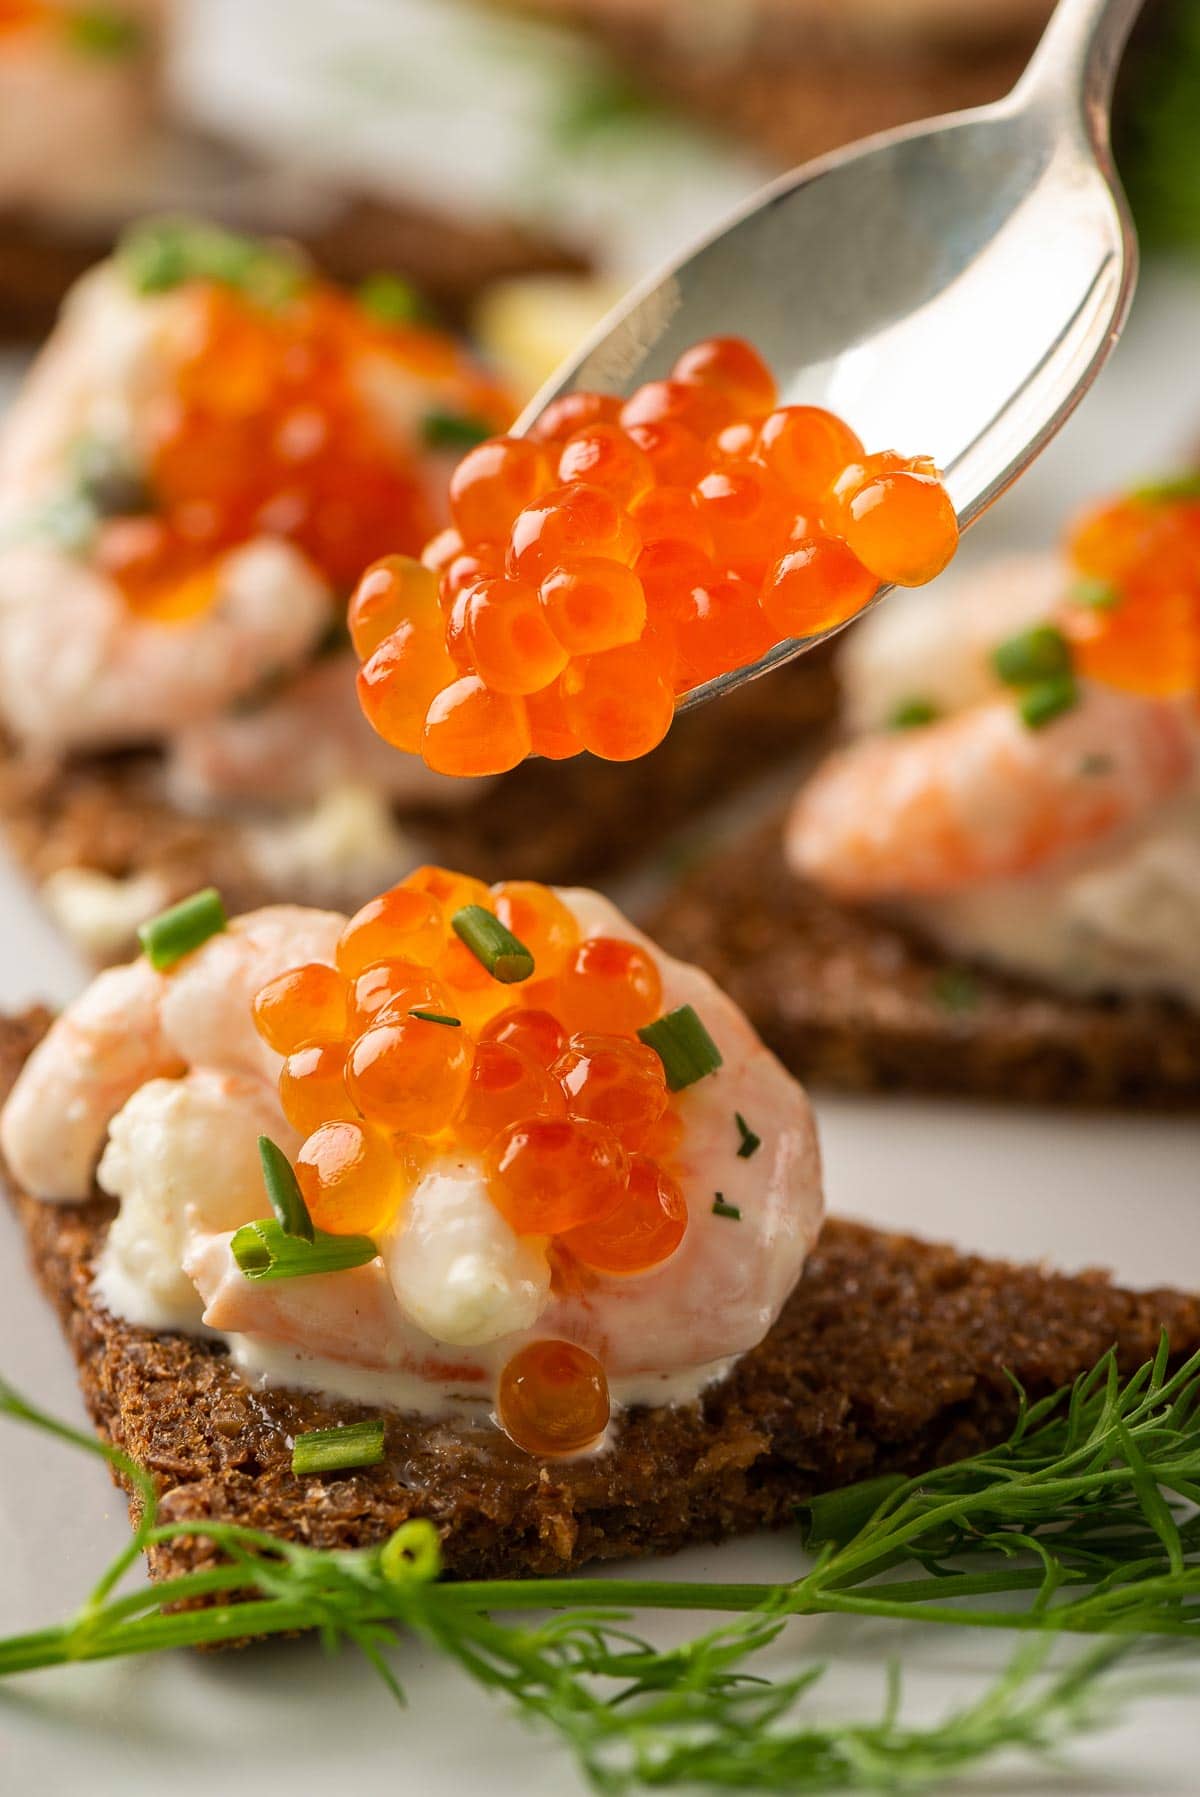 Bright orange roe being spooned on to a slice of Swedish Toast Skagen.